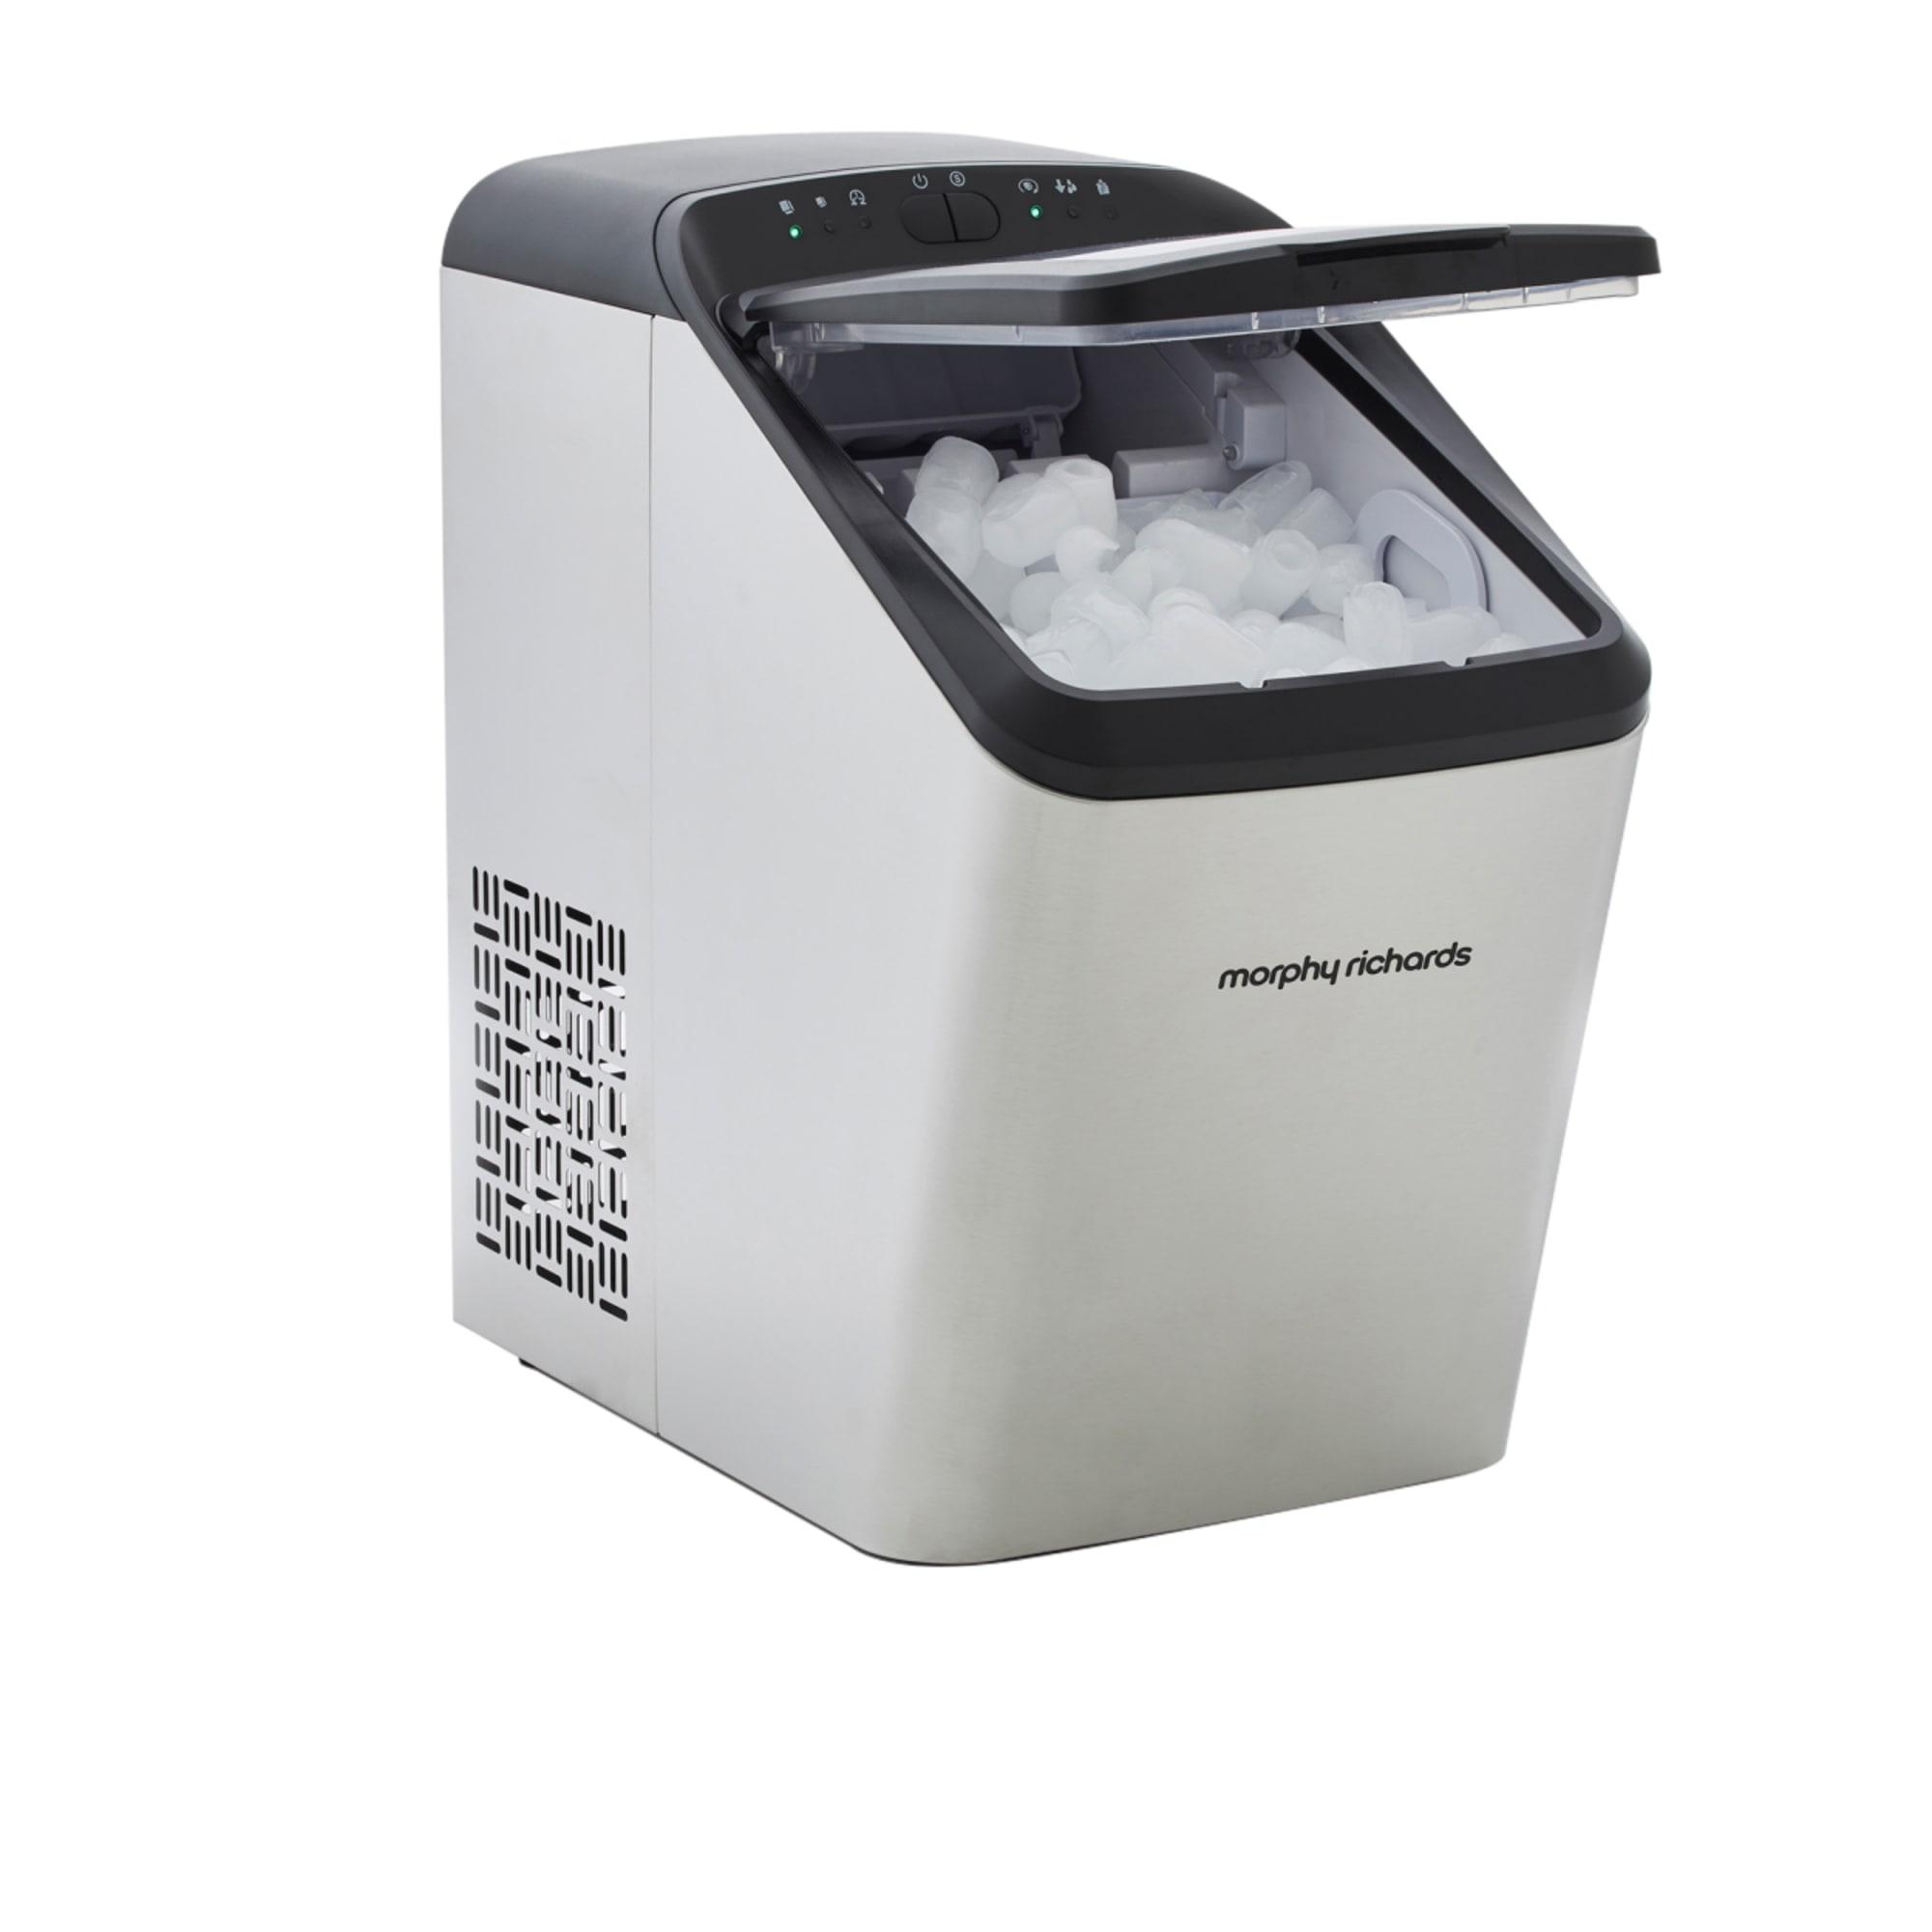 Morphy Richards Stainless Steel Ice Maker 2.8L Image 3